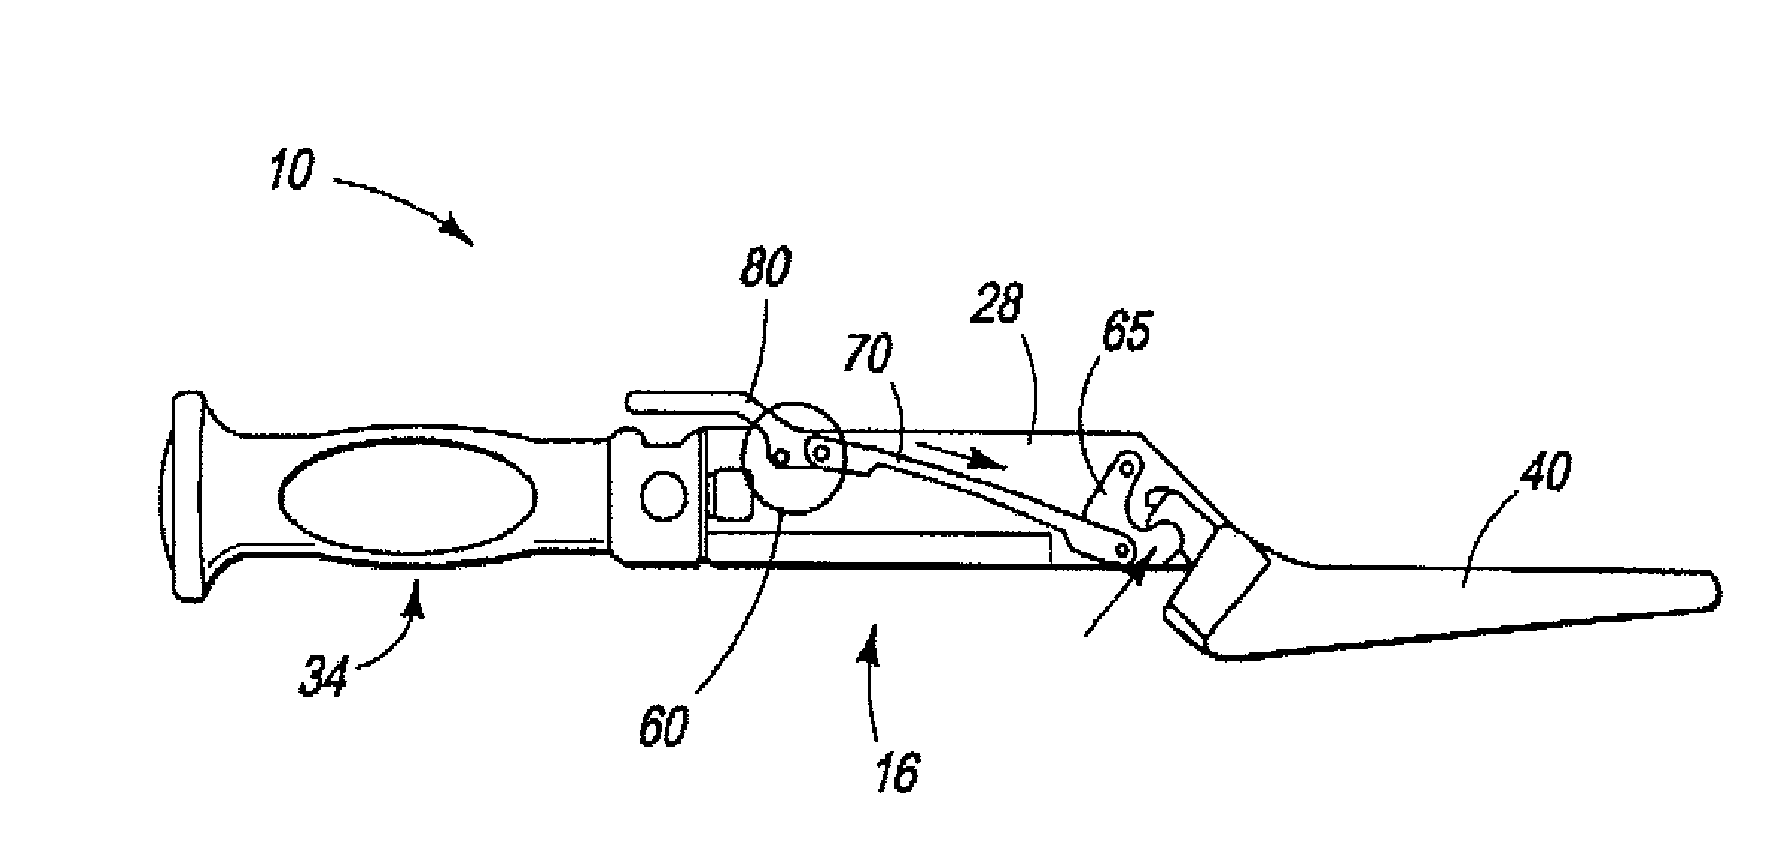 Surgical tool holder for facilitated sterilization